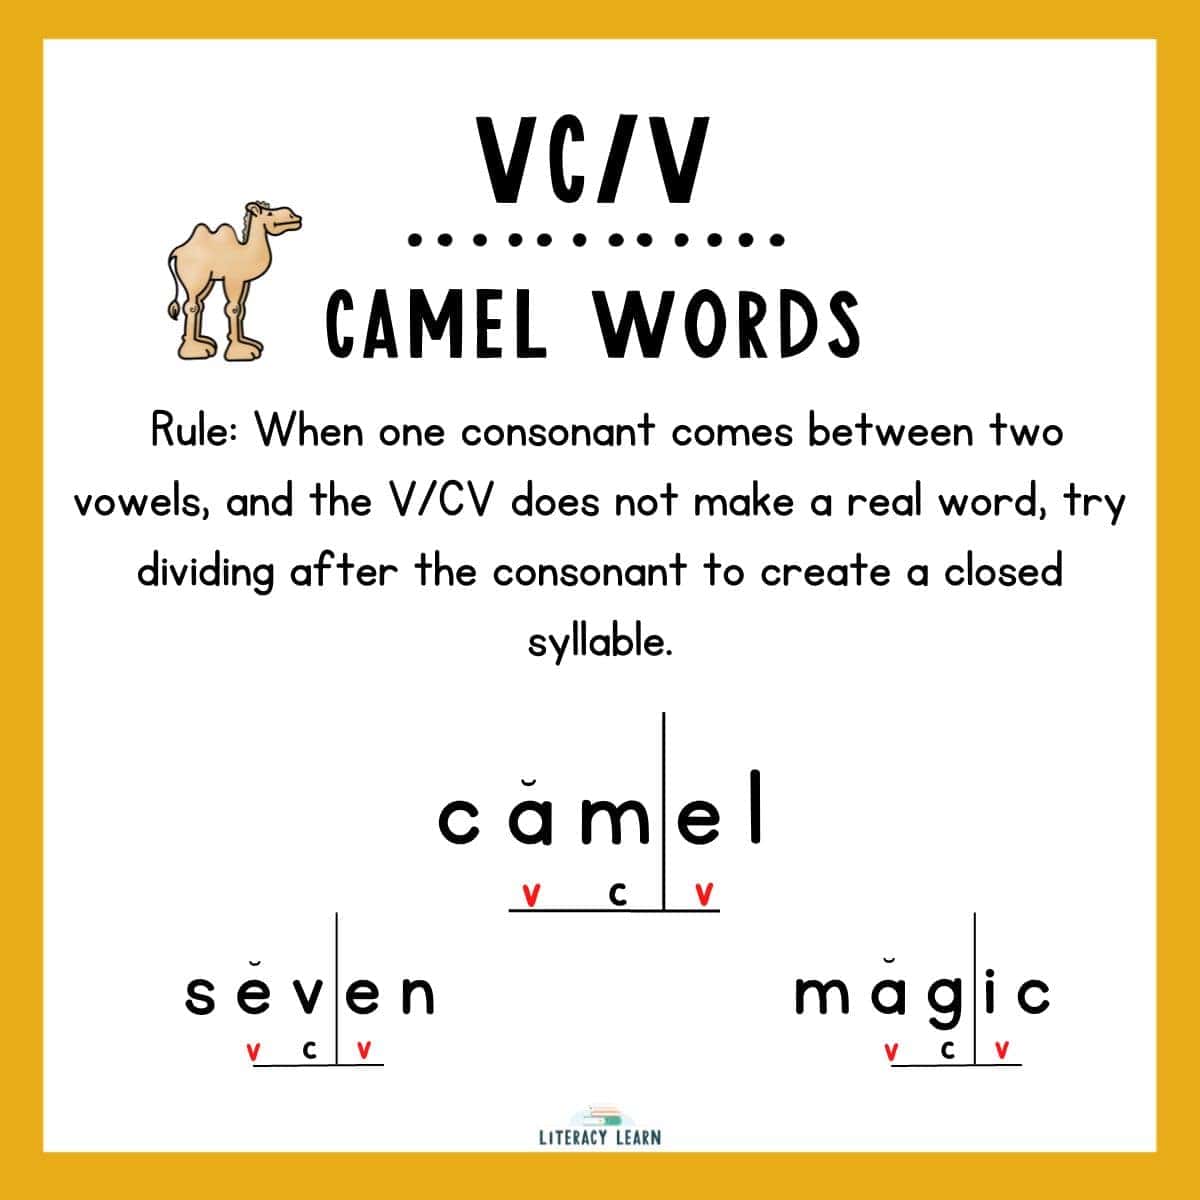 Orange graphic focused on VC/V Camel Words with rule and example words divided into syllables.